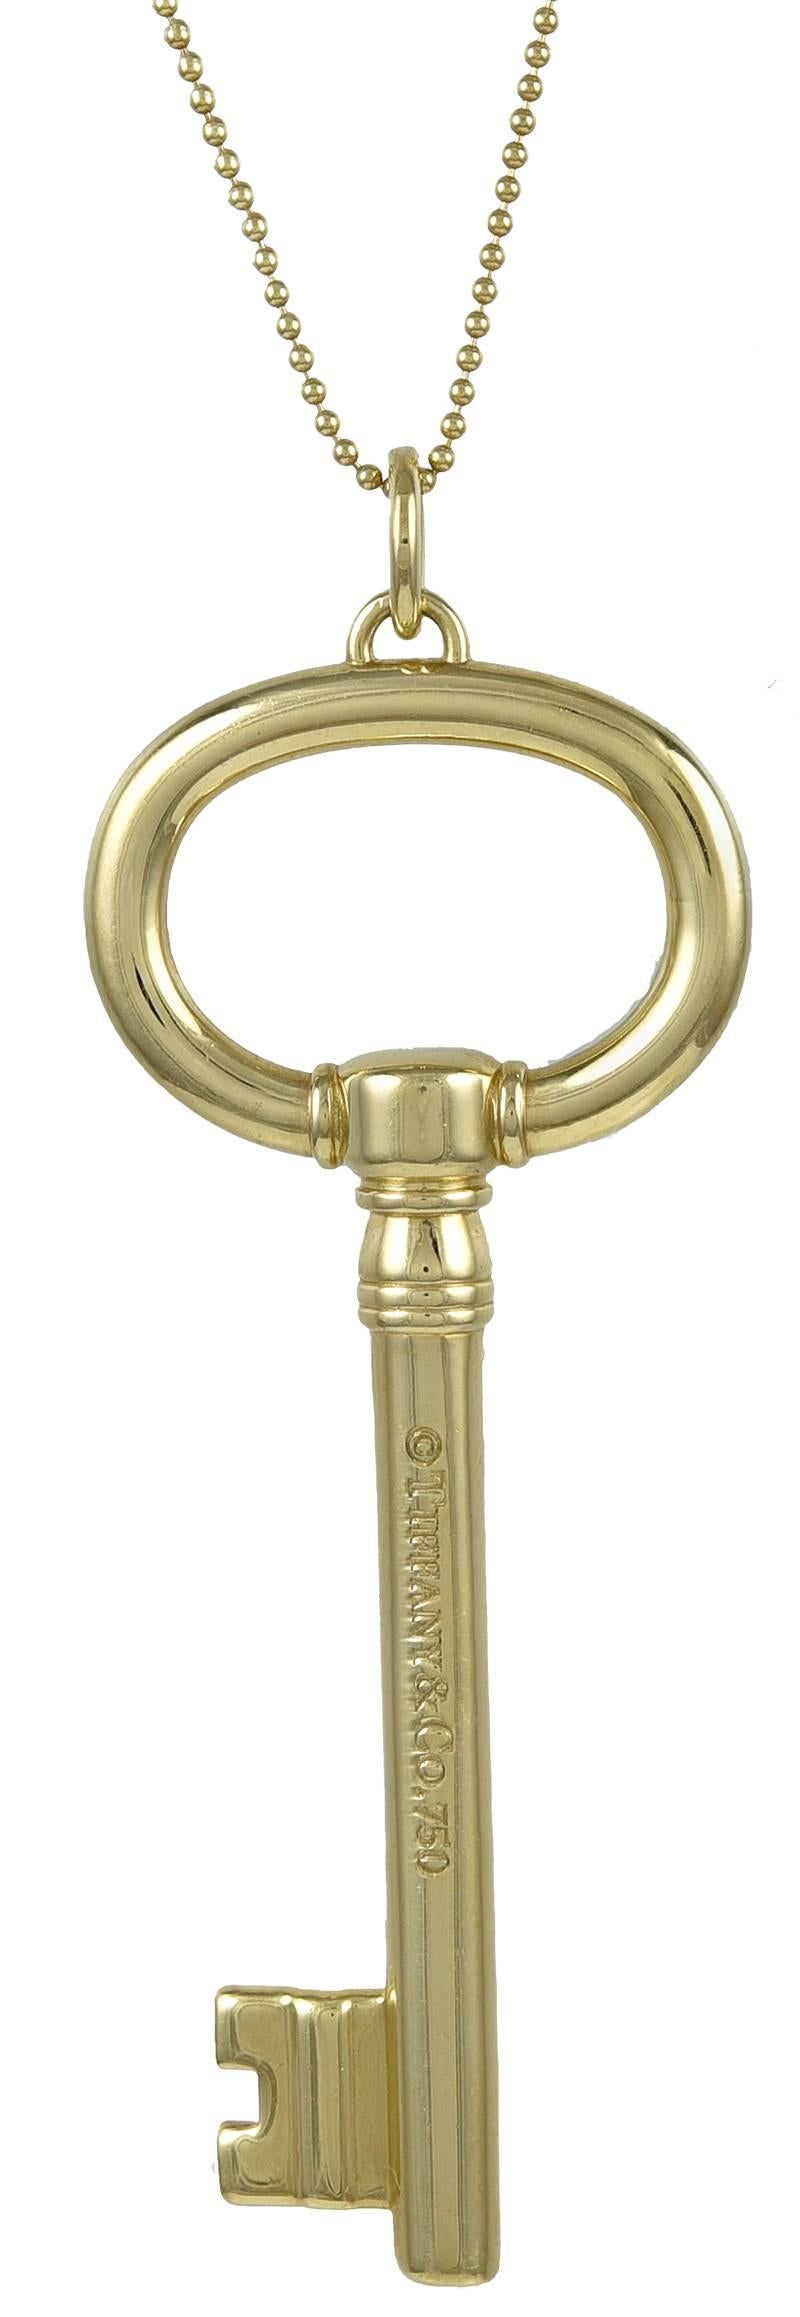 Large figural key pendant.  Made and signed by TIFFANY & CO.   18K yellow gold.  2 1/2